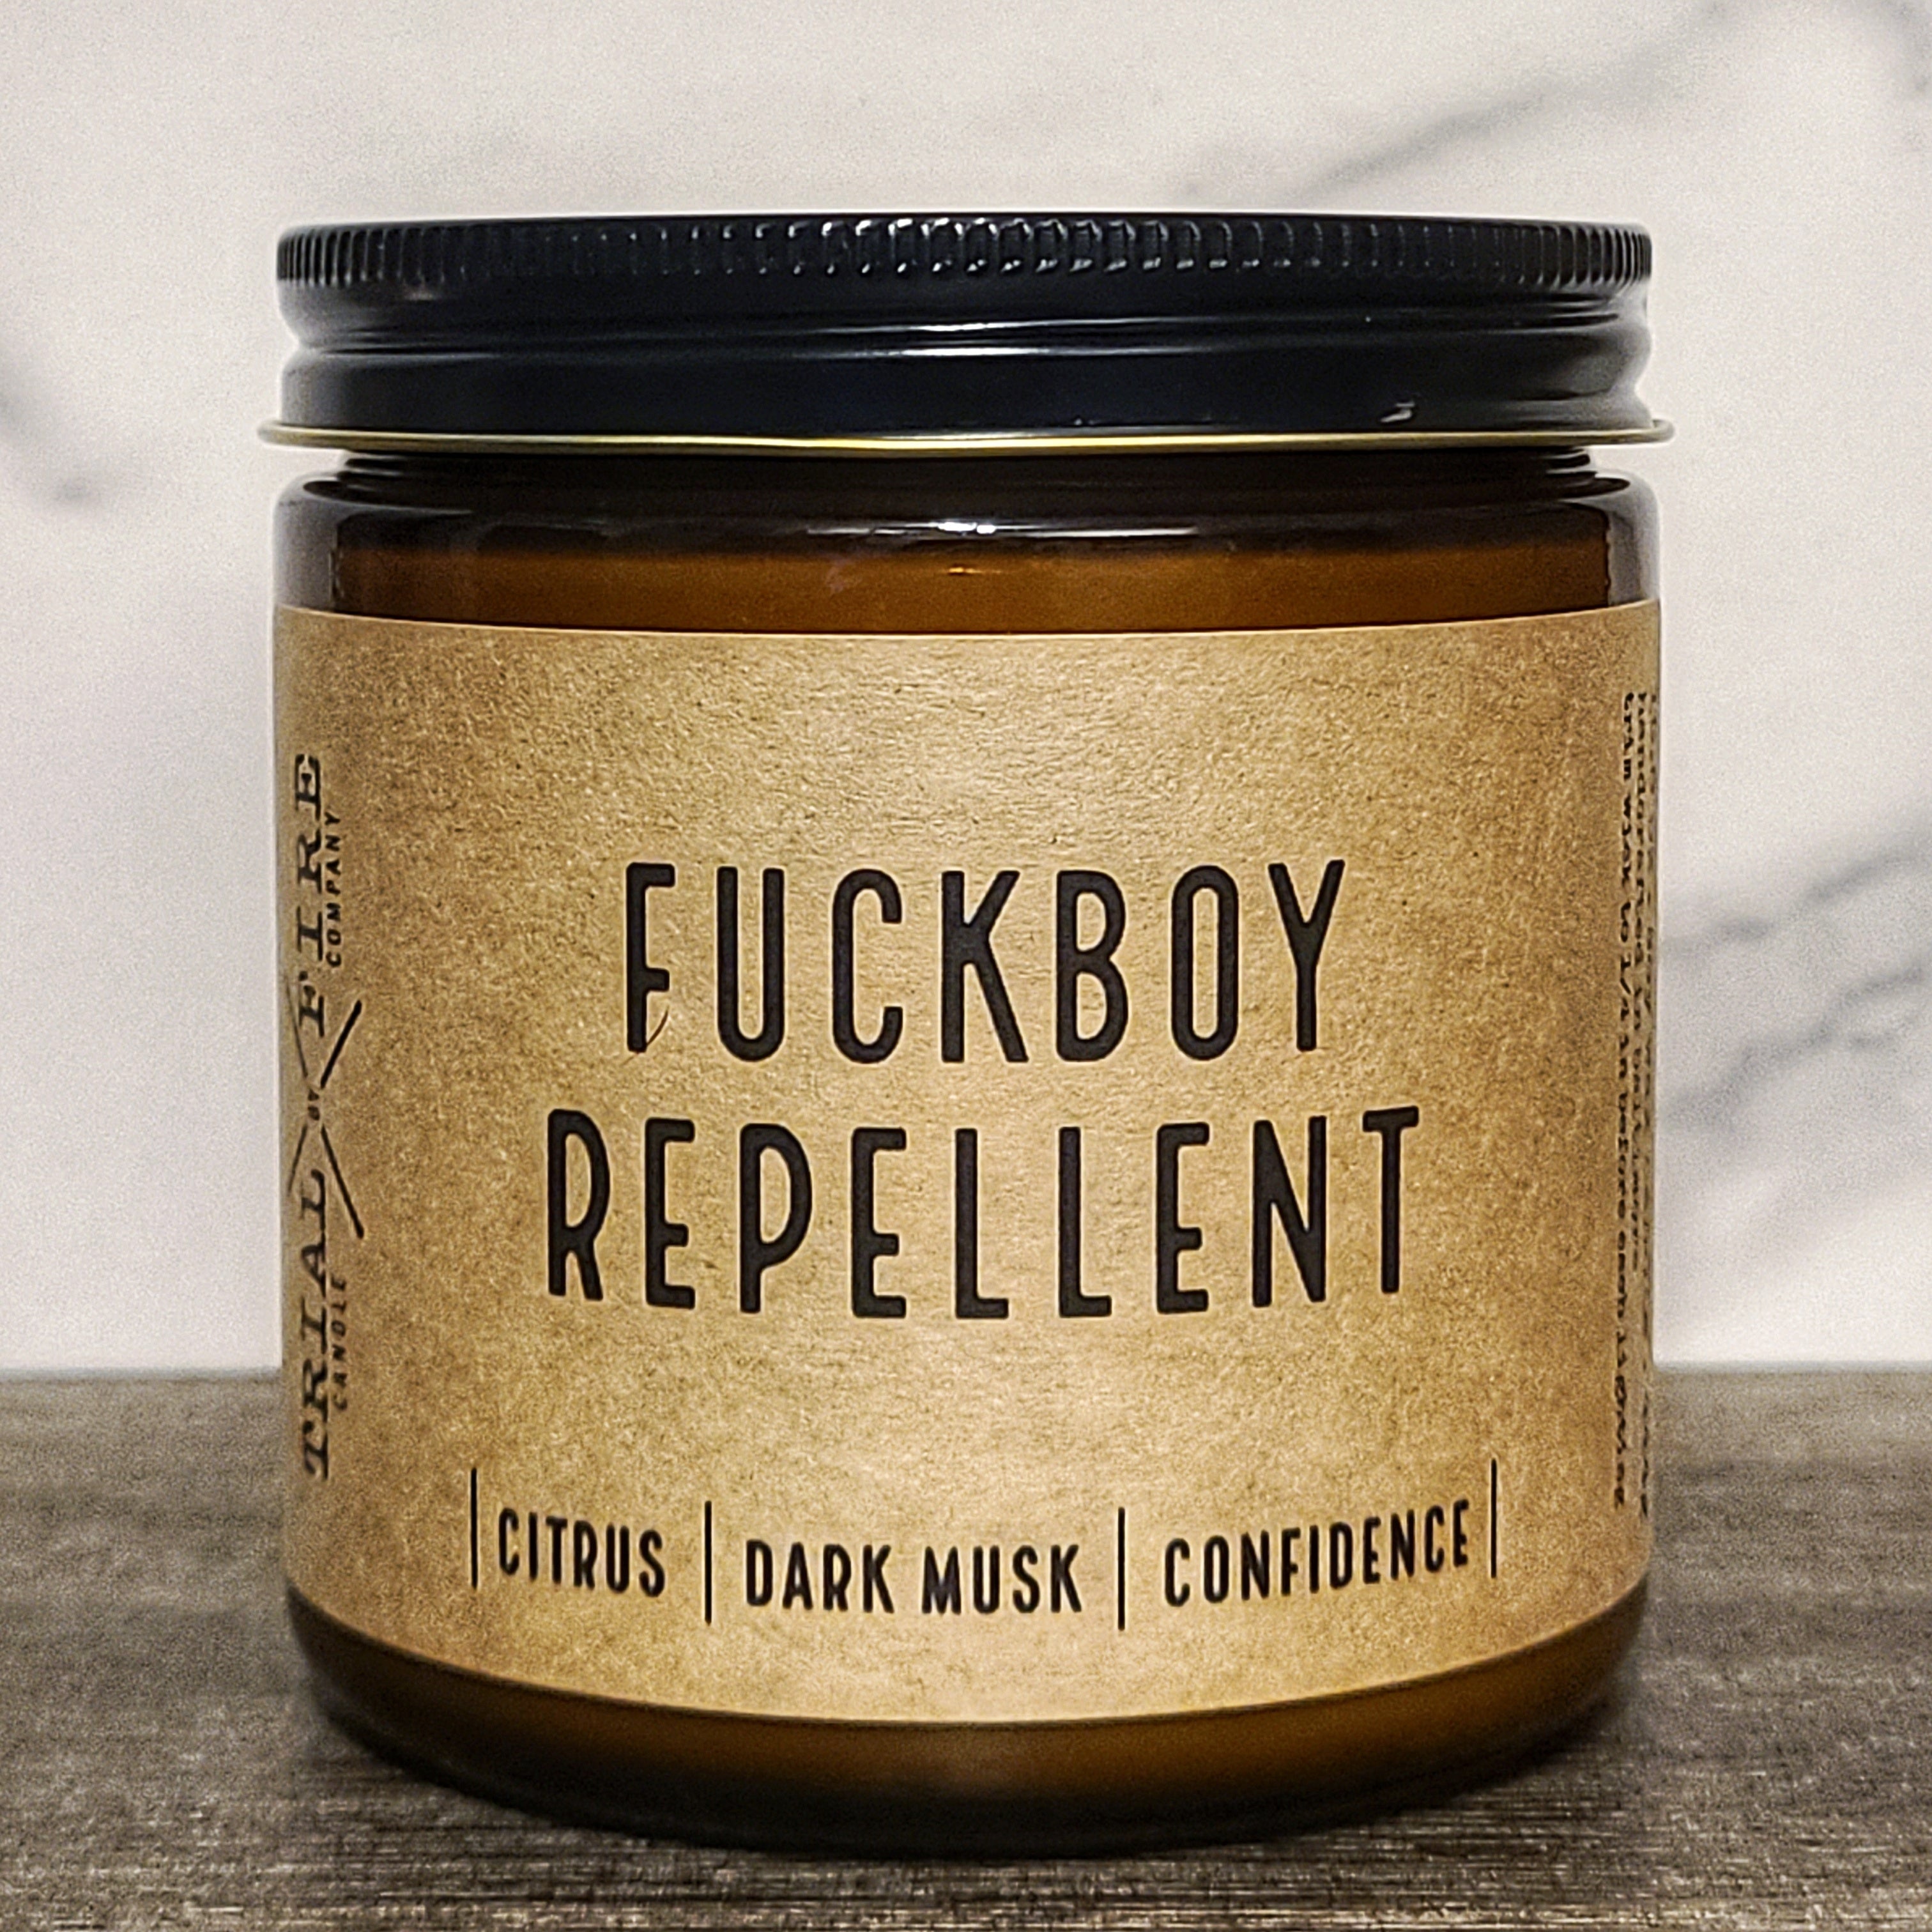 FUCKBOY REPELLENT (minis available)